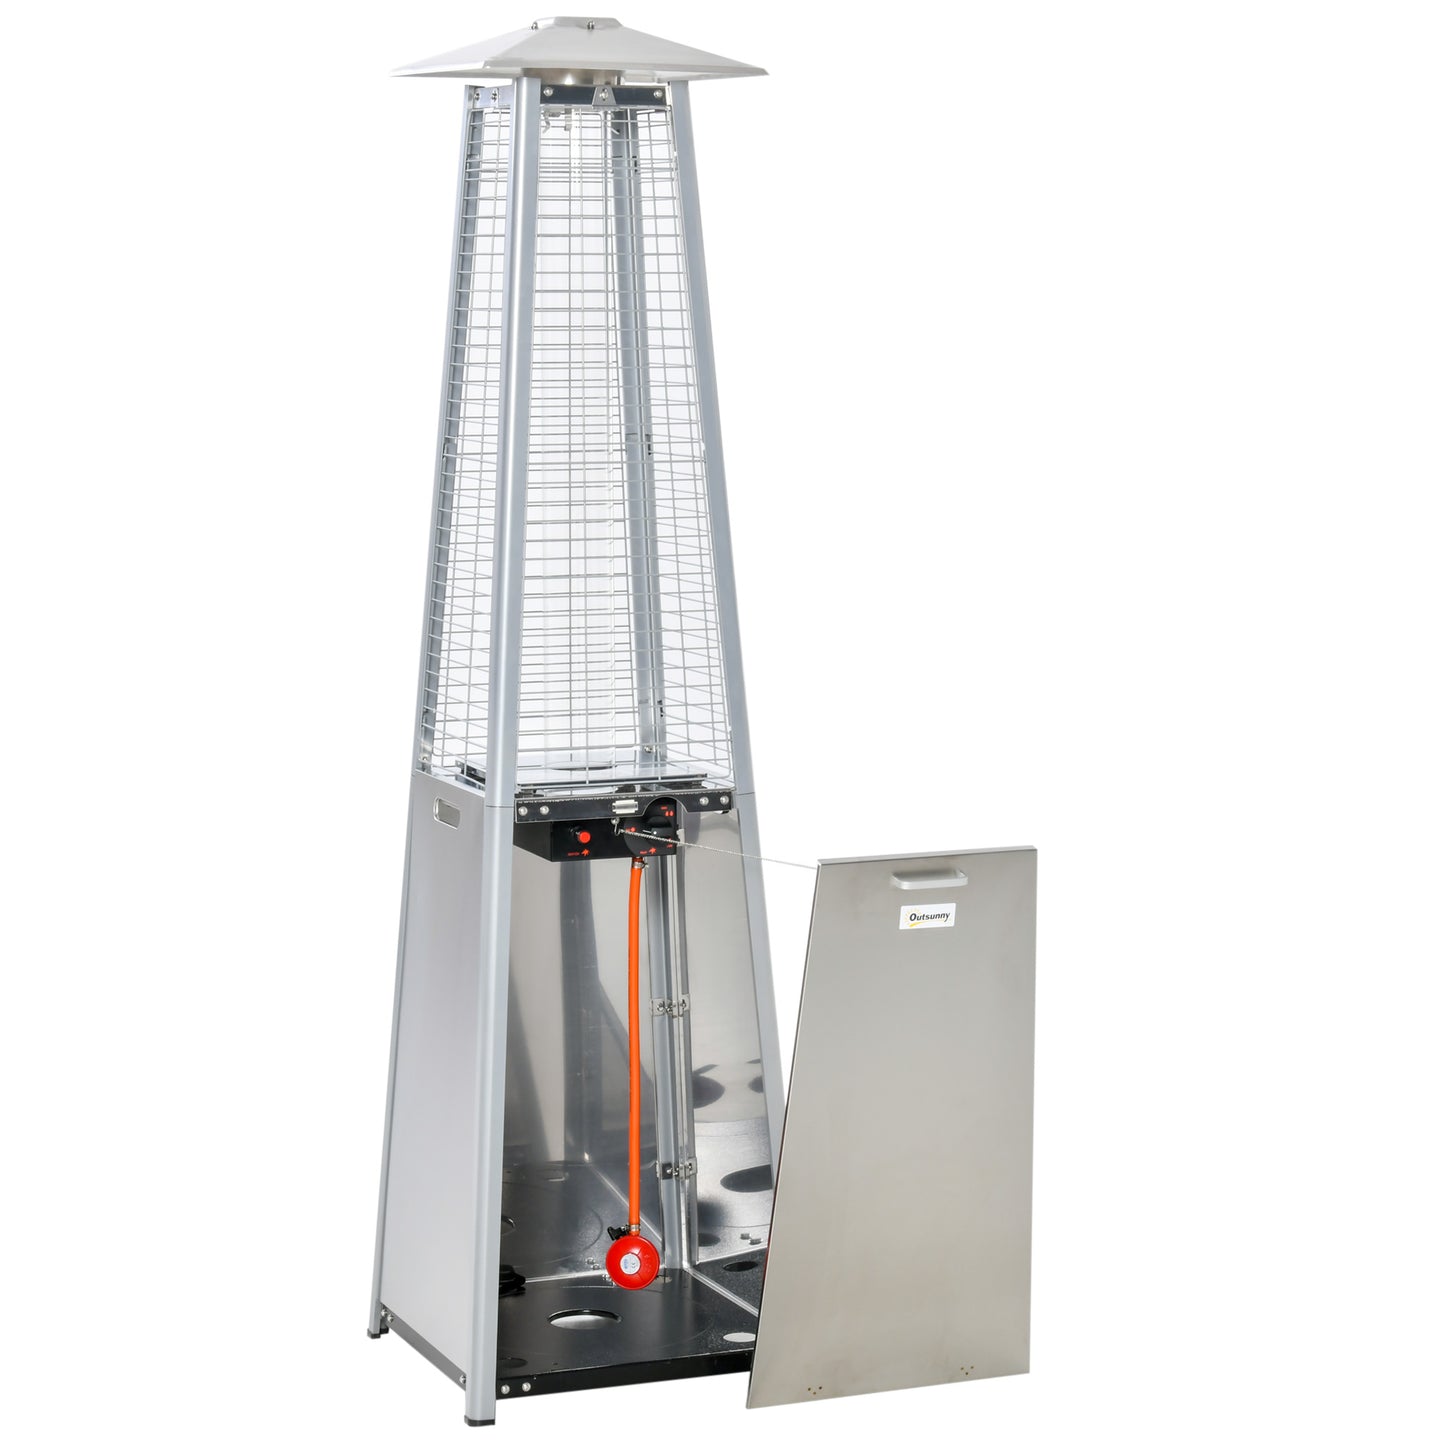 Outsunny 11.2KW Outdoor Patio Gas Heater Standing Tower Heater w/ Regulator and Hose